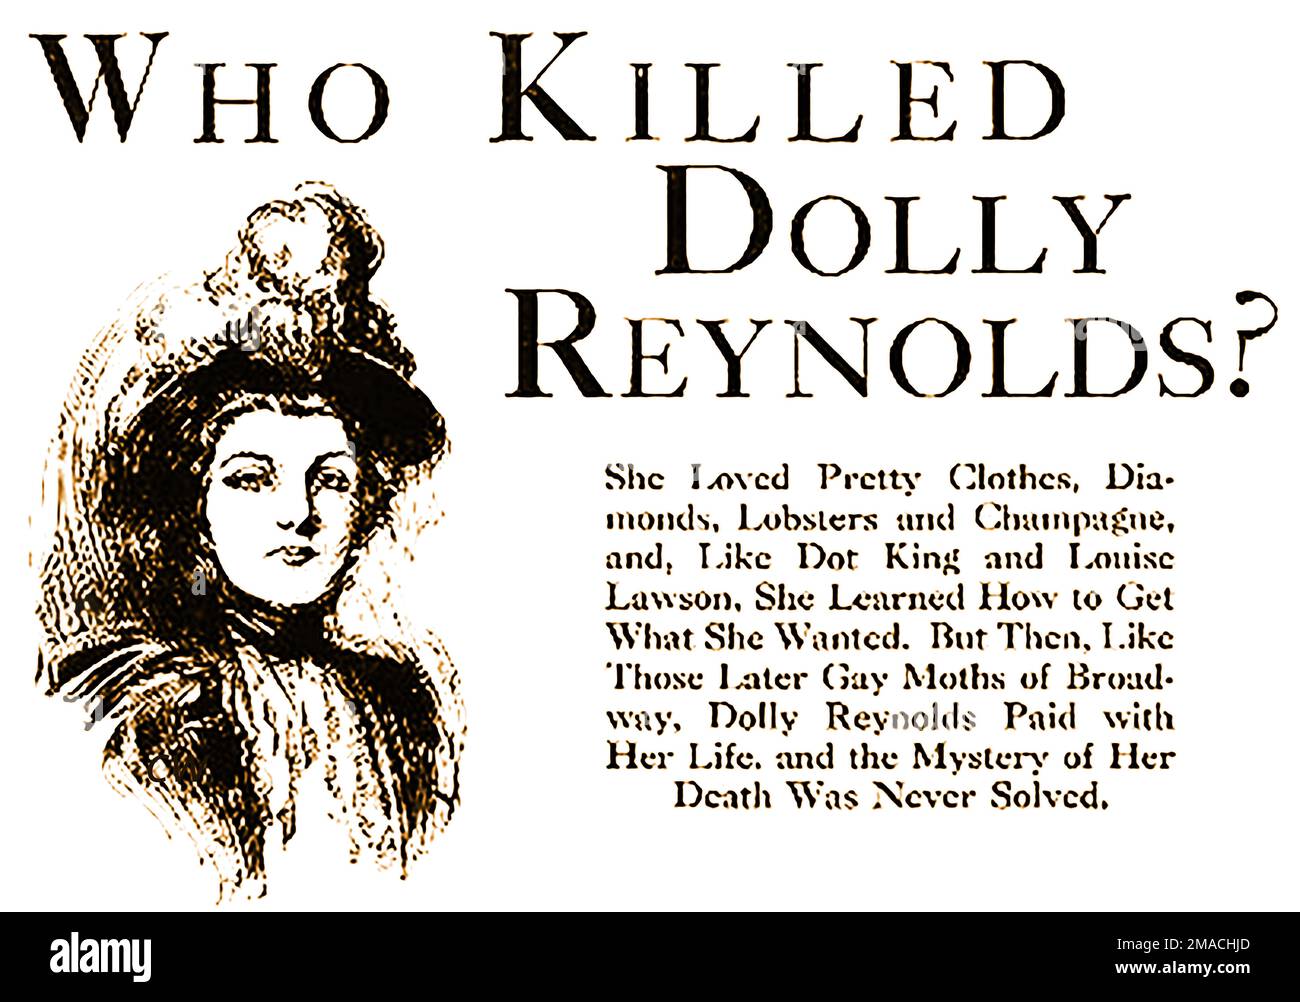 PORTRAIT OF DOLLY REYNOLDS - Dentist, Dr Samuel J Kennedy was implicated in the long running  Dolly Reynolds murder case in the USA.   The woman who had  registered under the name of “E. Maxwell and wife at the Grand Hotel, New York was found robbed and dead in her room by a chambermaid on August 16th, 1898, Her killer was never found. Stock Photo